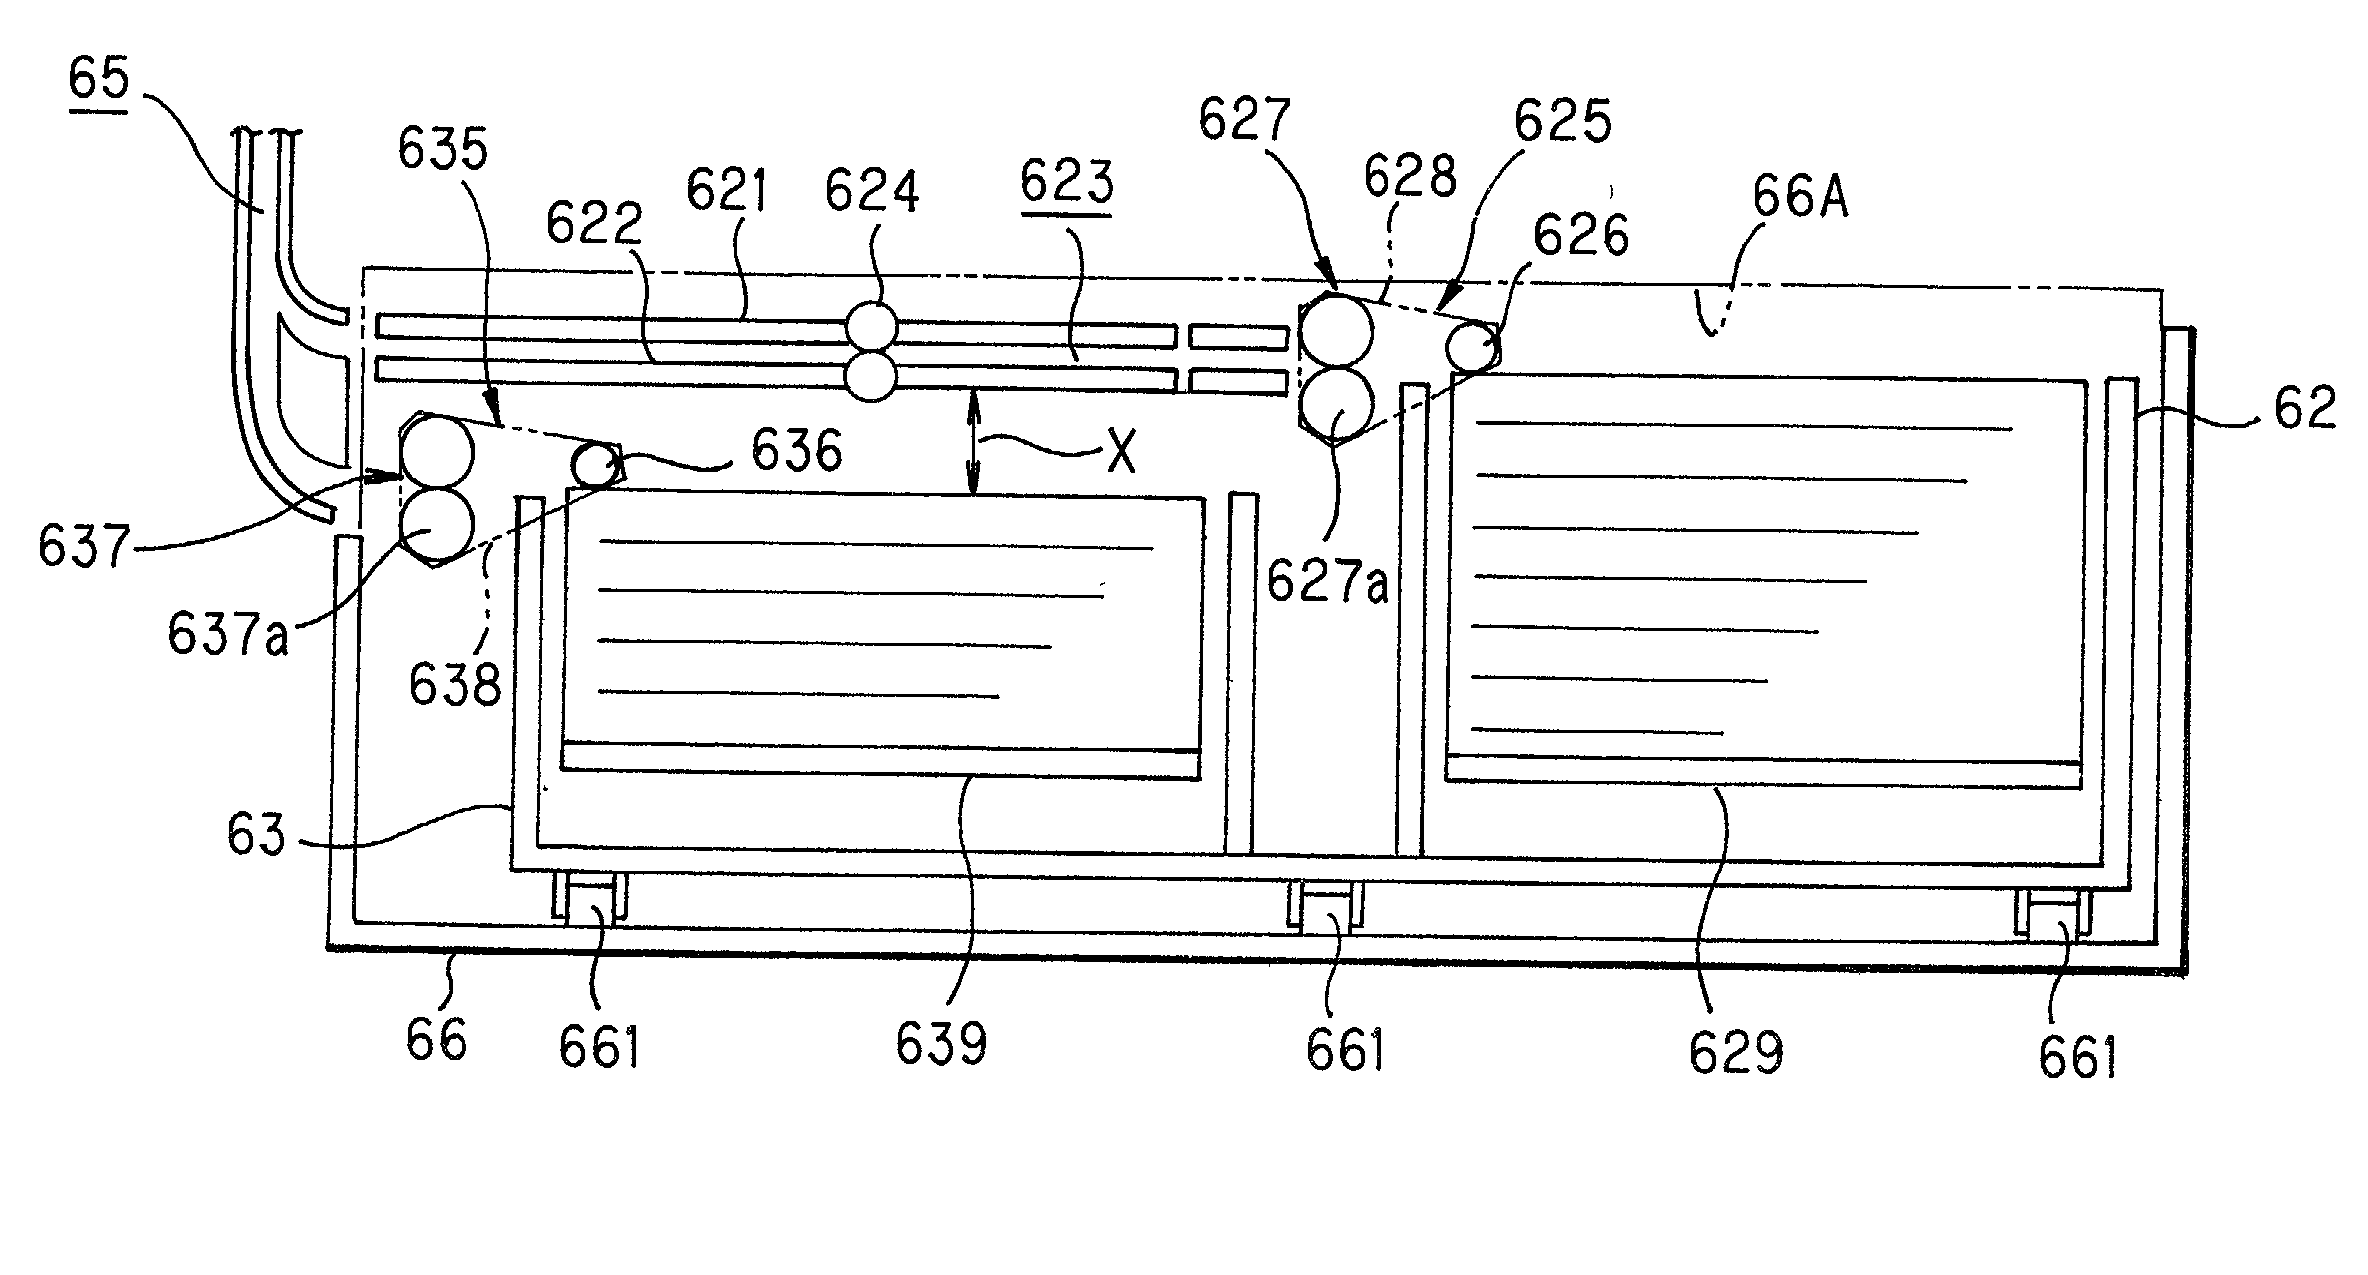 Paper feeder for an image forming apparatus